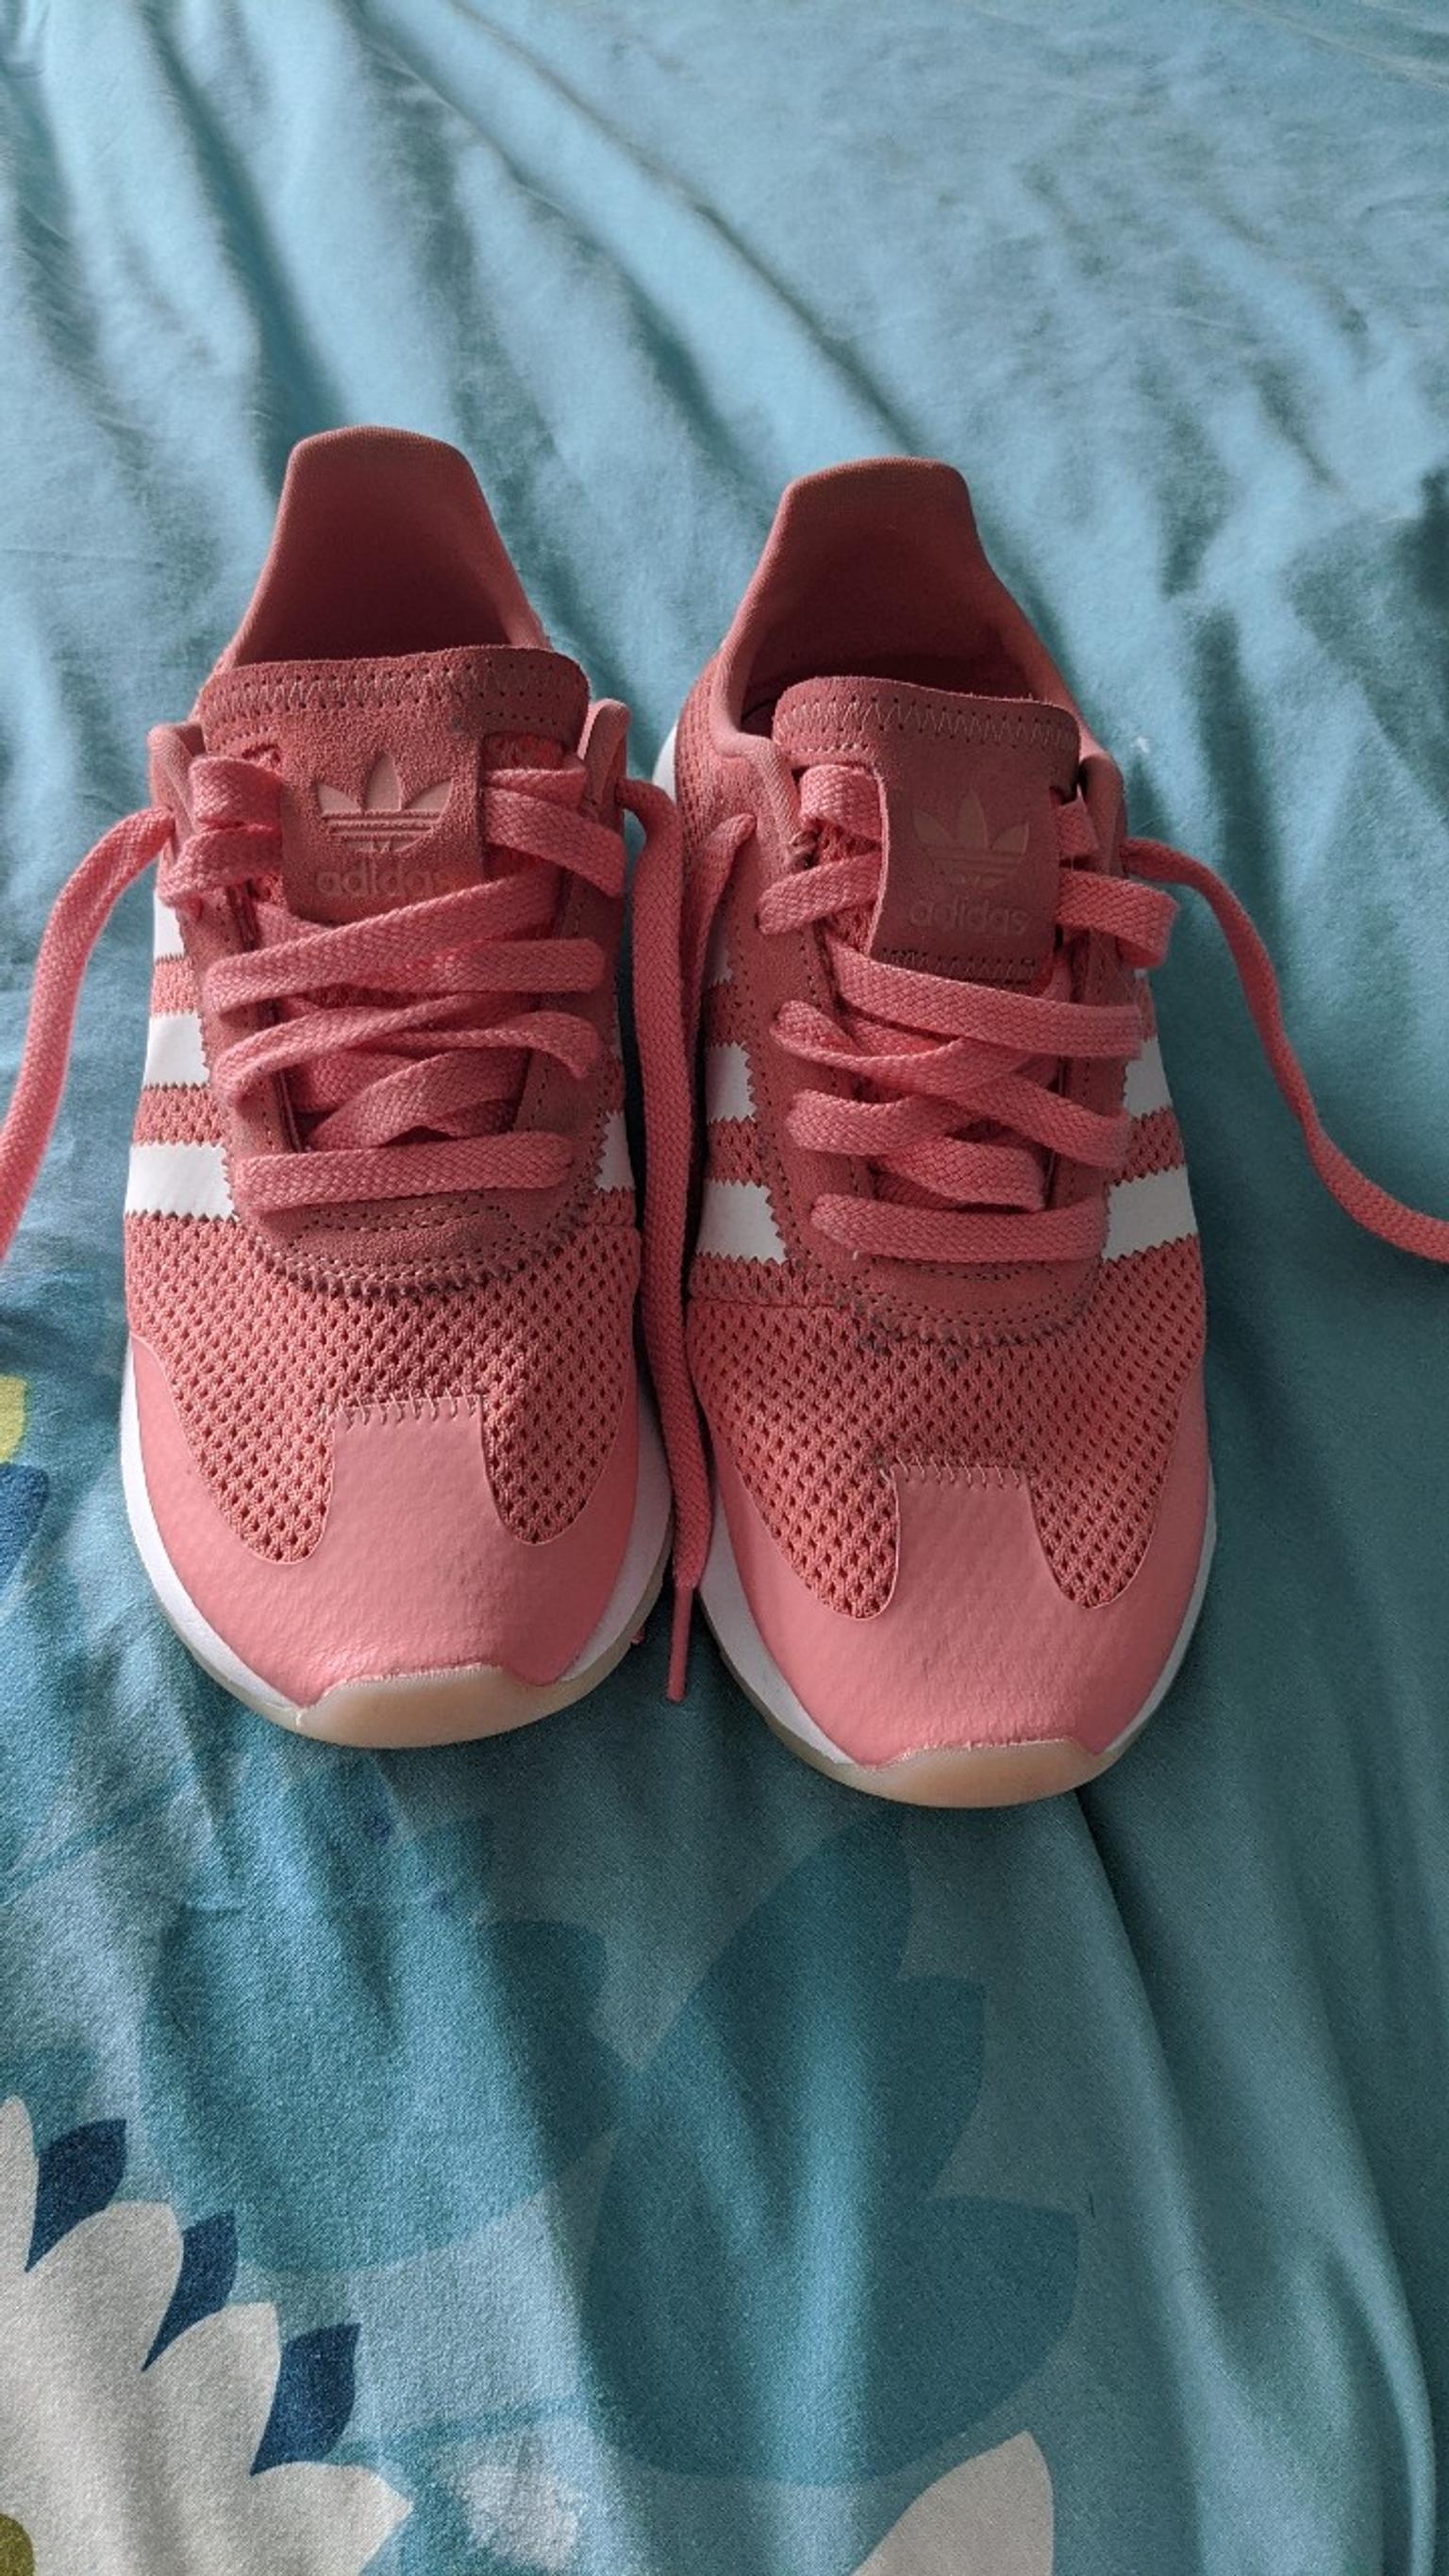 adidas trainers size 5.5